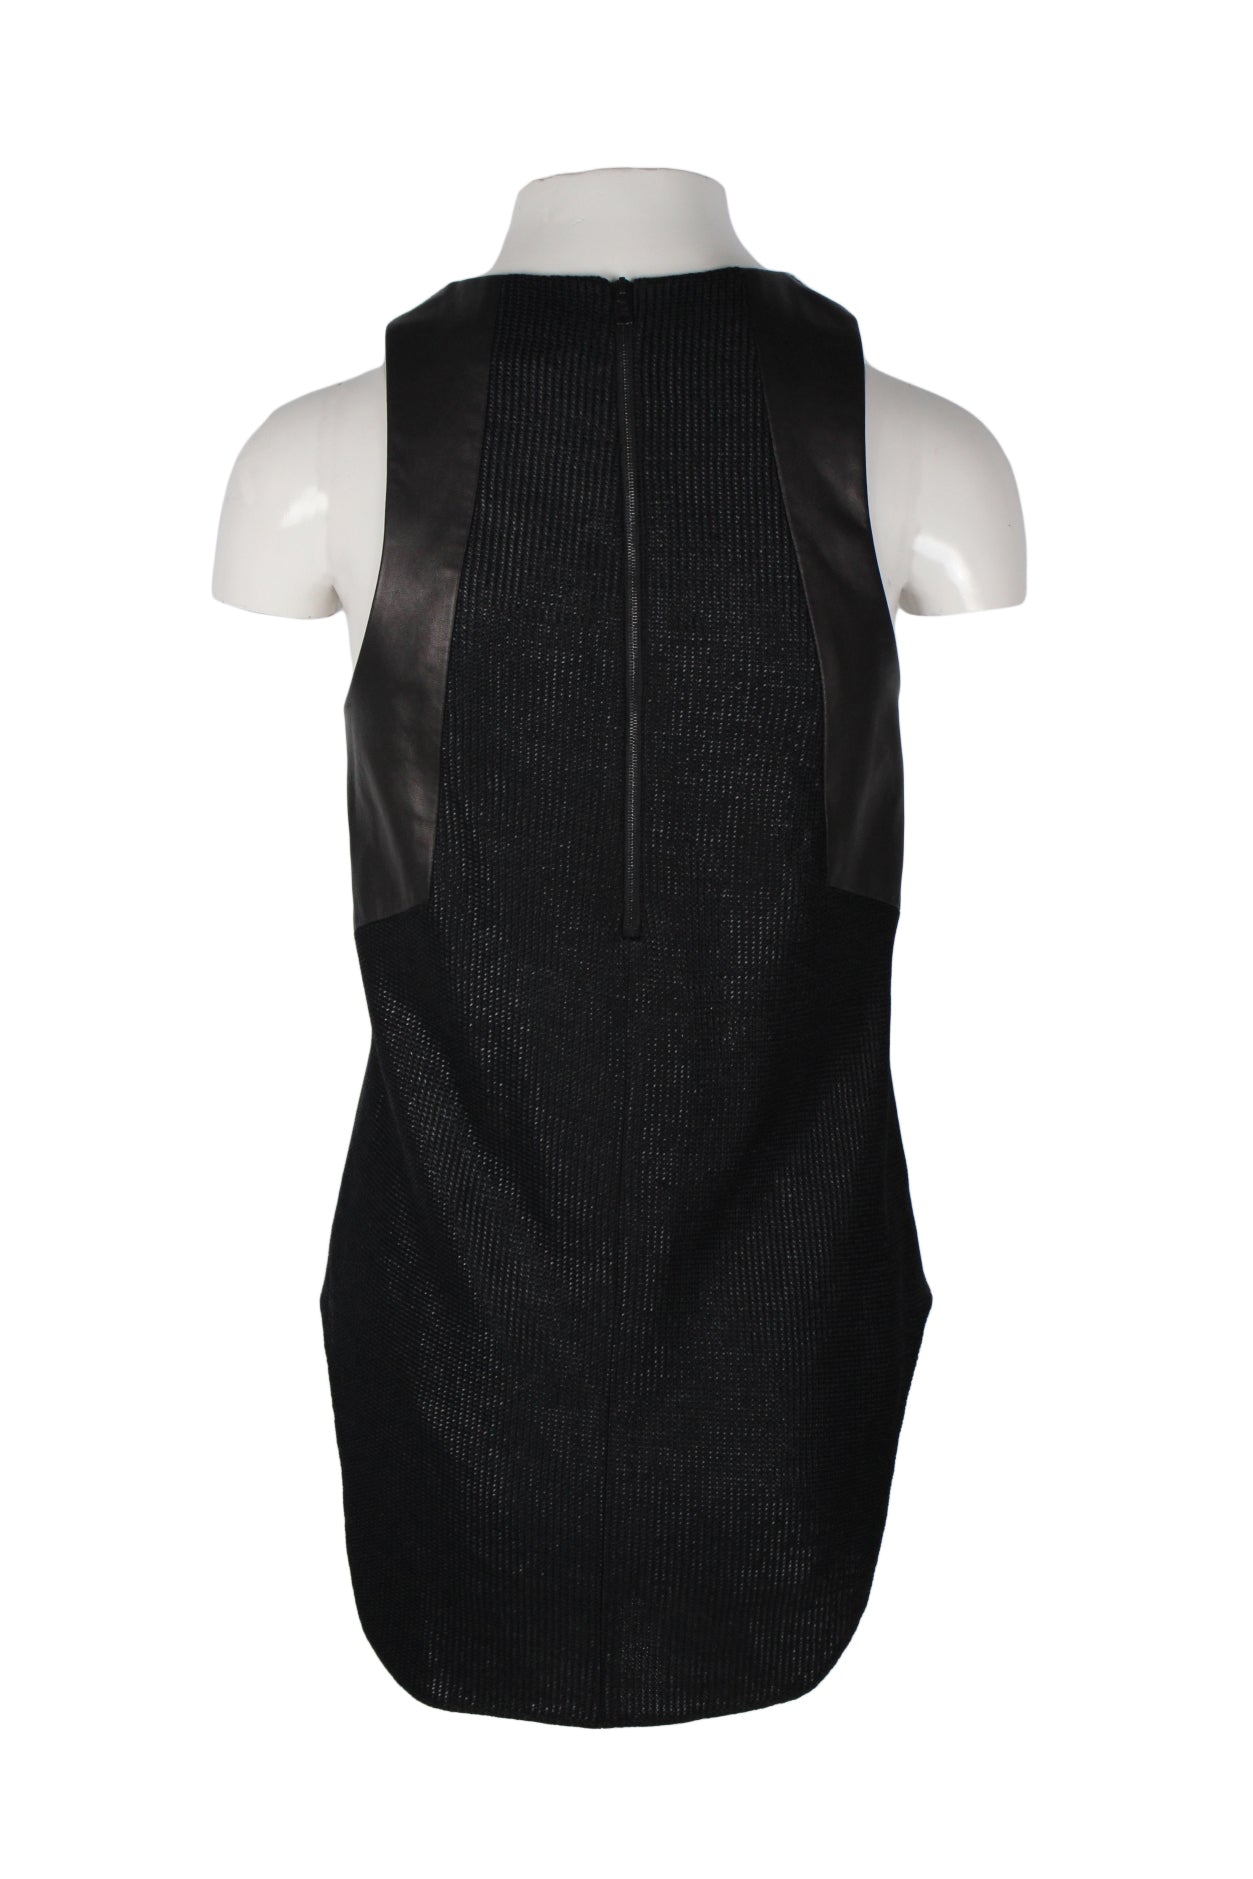 back angle of woven sleeveless blouse. features exposed dark zipper behind neck, low rounded hem, and leather panels on sides from shoulder to bottom of shoulder blade. 